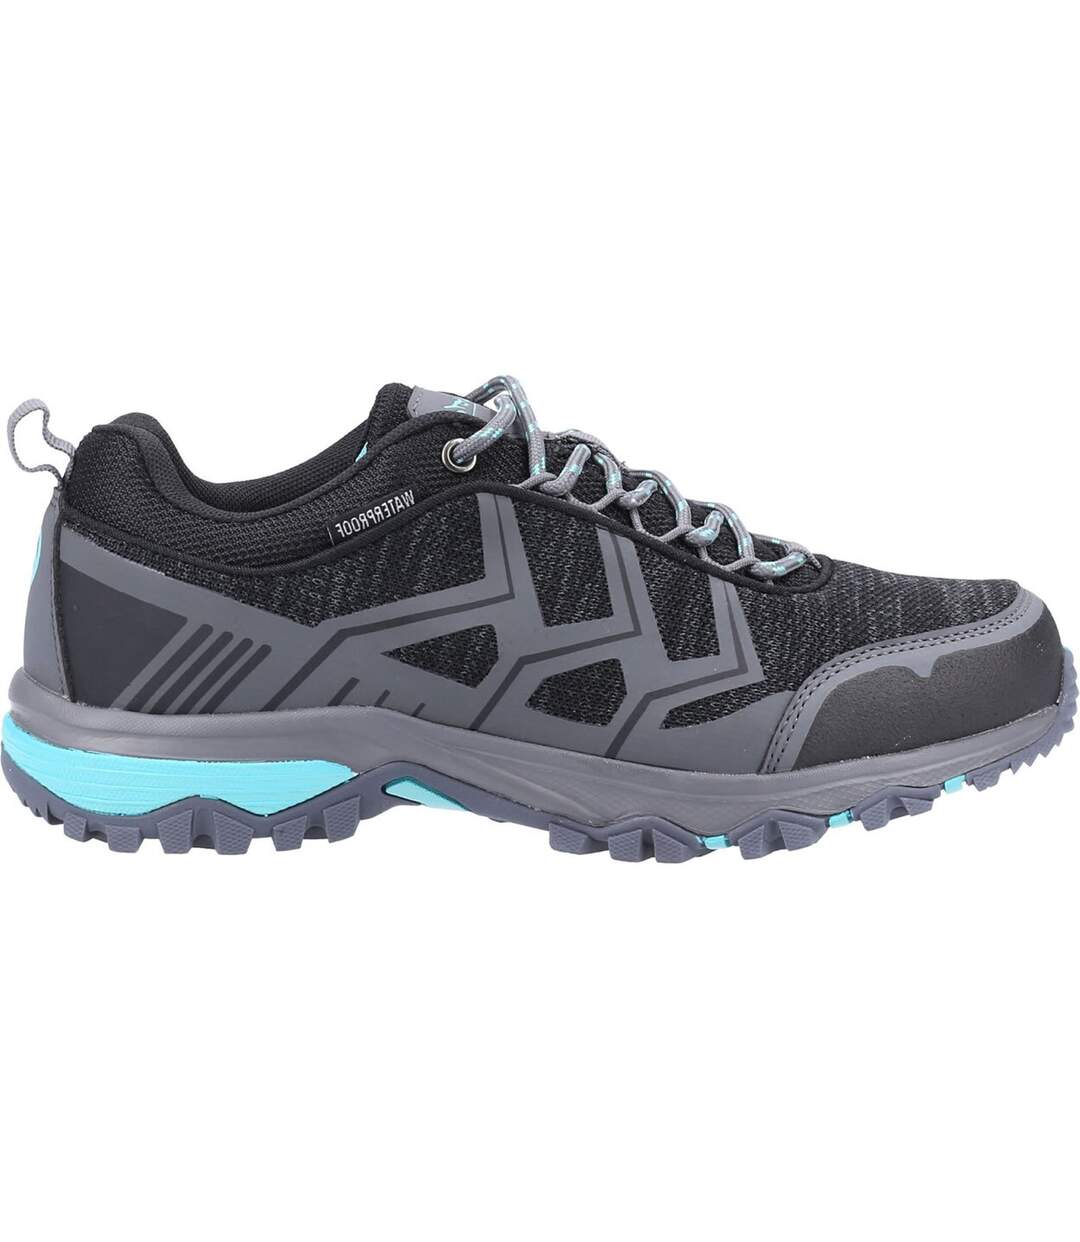 Cotswold Womens/Ladies Wychwood Low WP Hiking Shoes (Gray) - UTFS8472